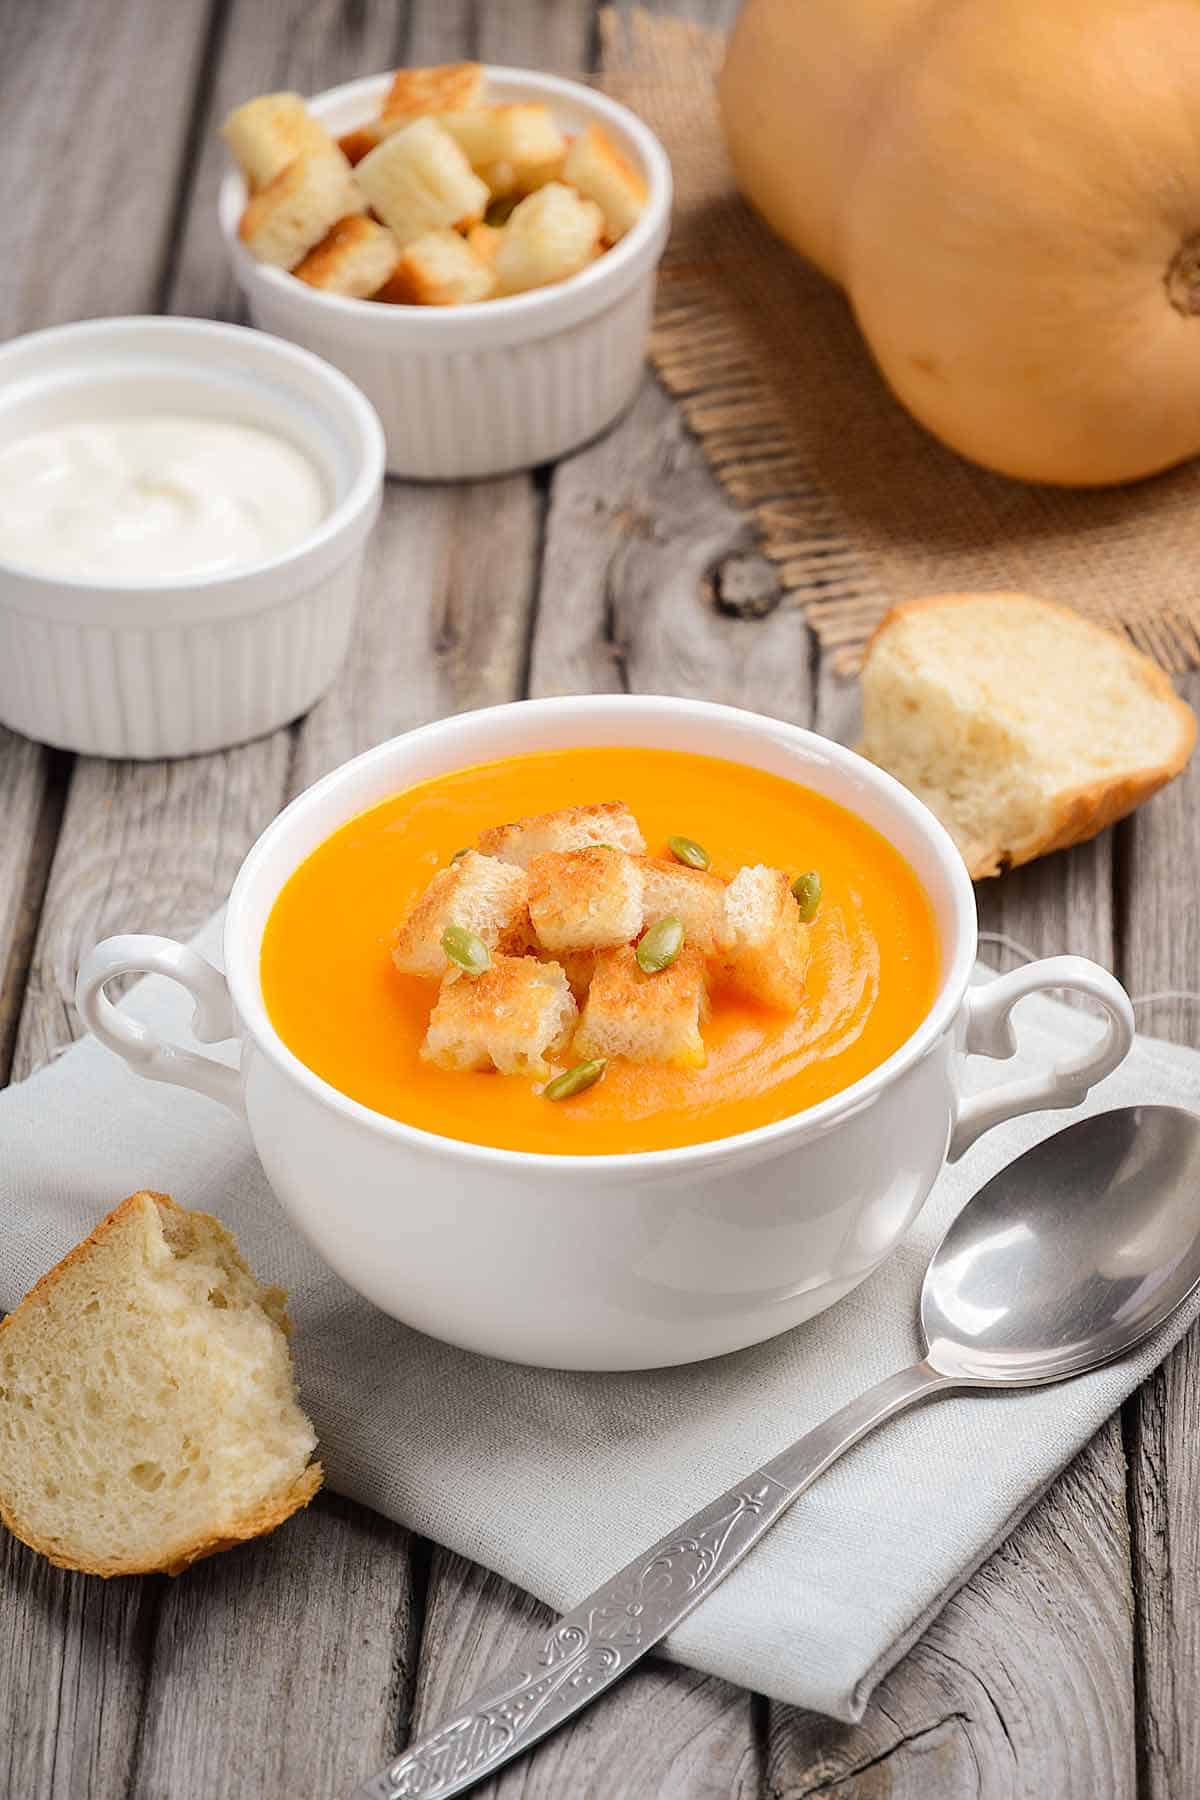 Bowl of soup with croutons.